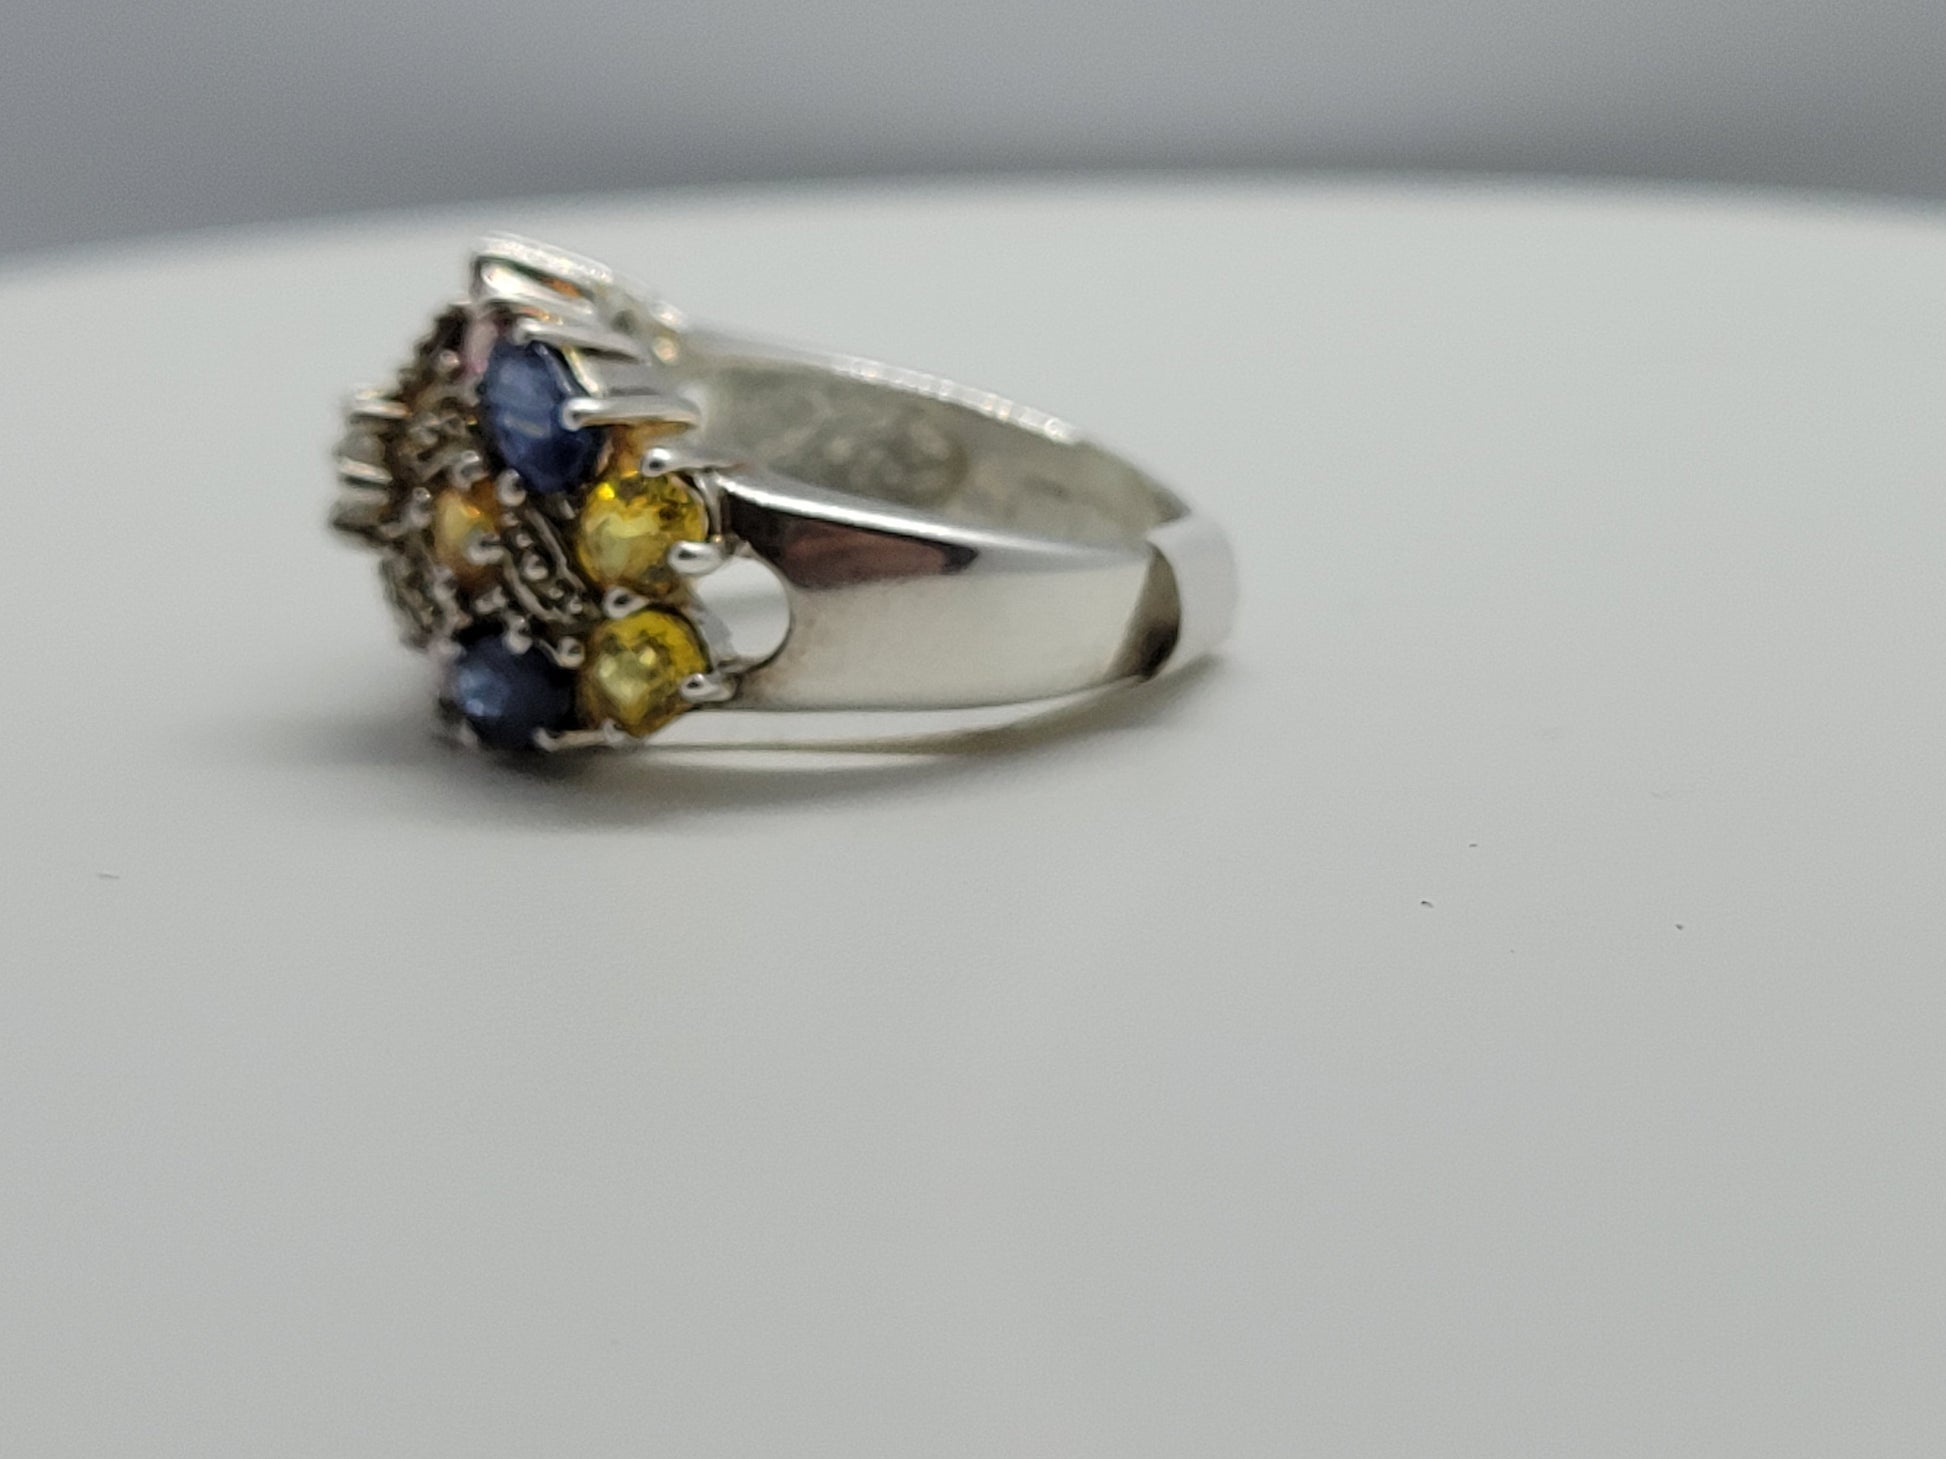 Vintage Blue and White Sapphire Yellow Citrine and Pink Tourmaline Ring in 925 Sterling Silver Flower Setting